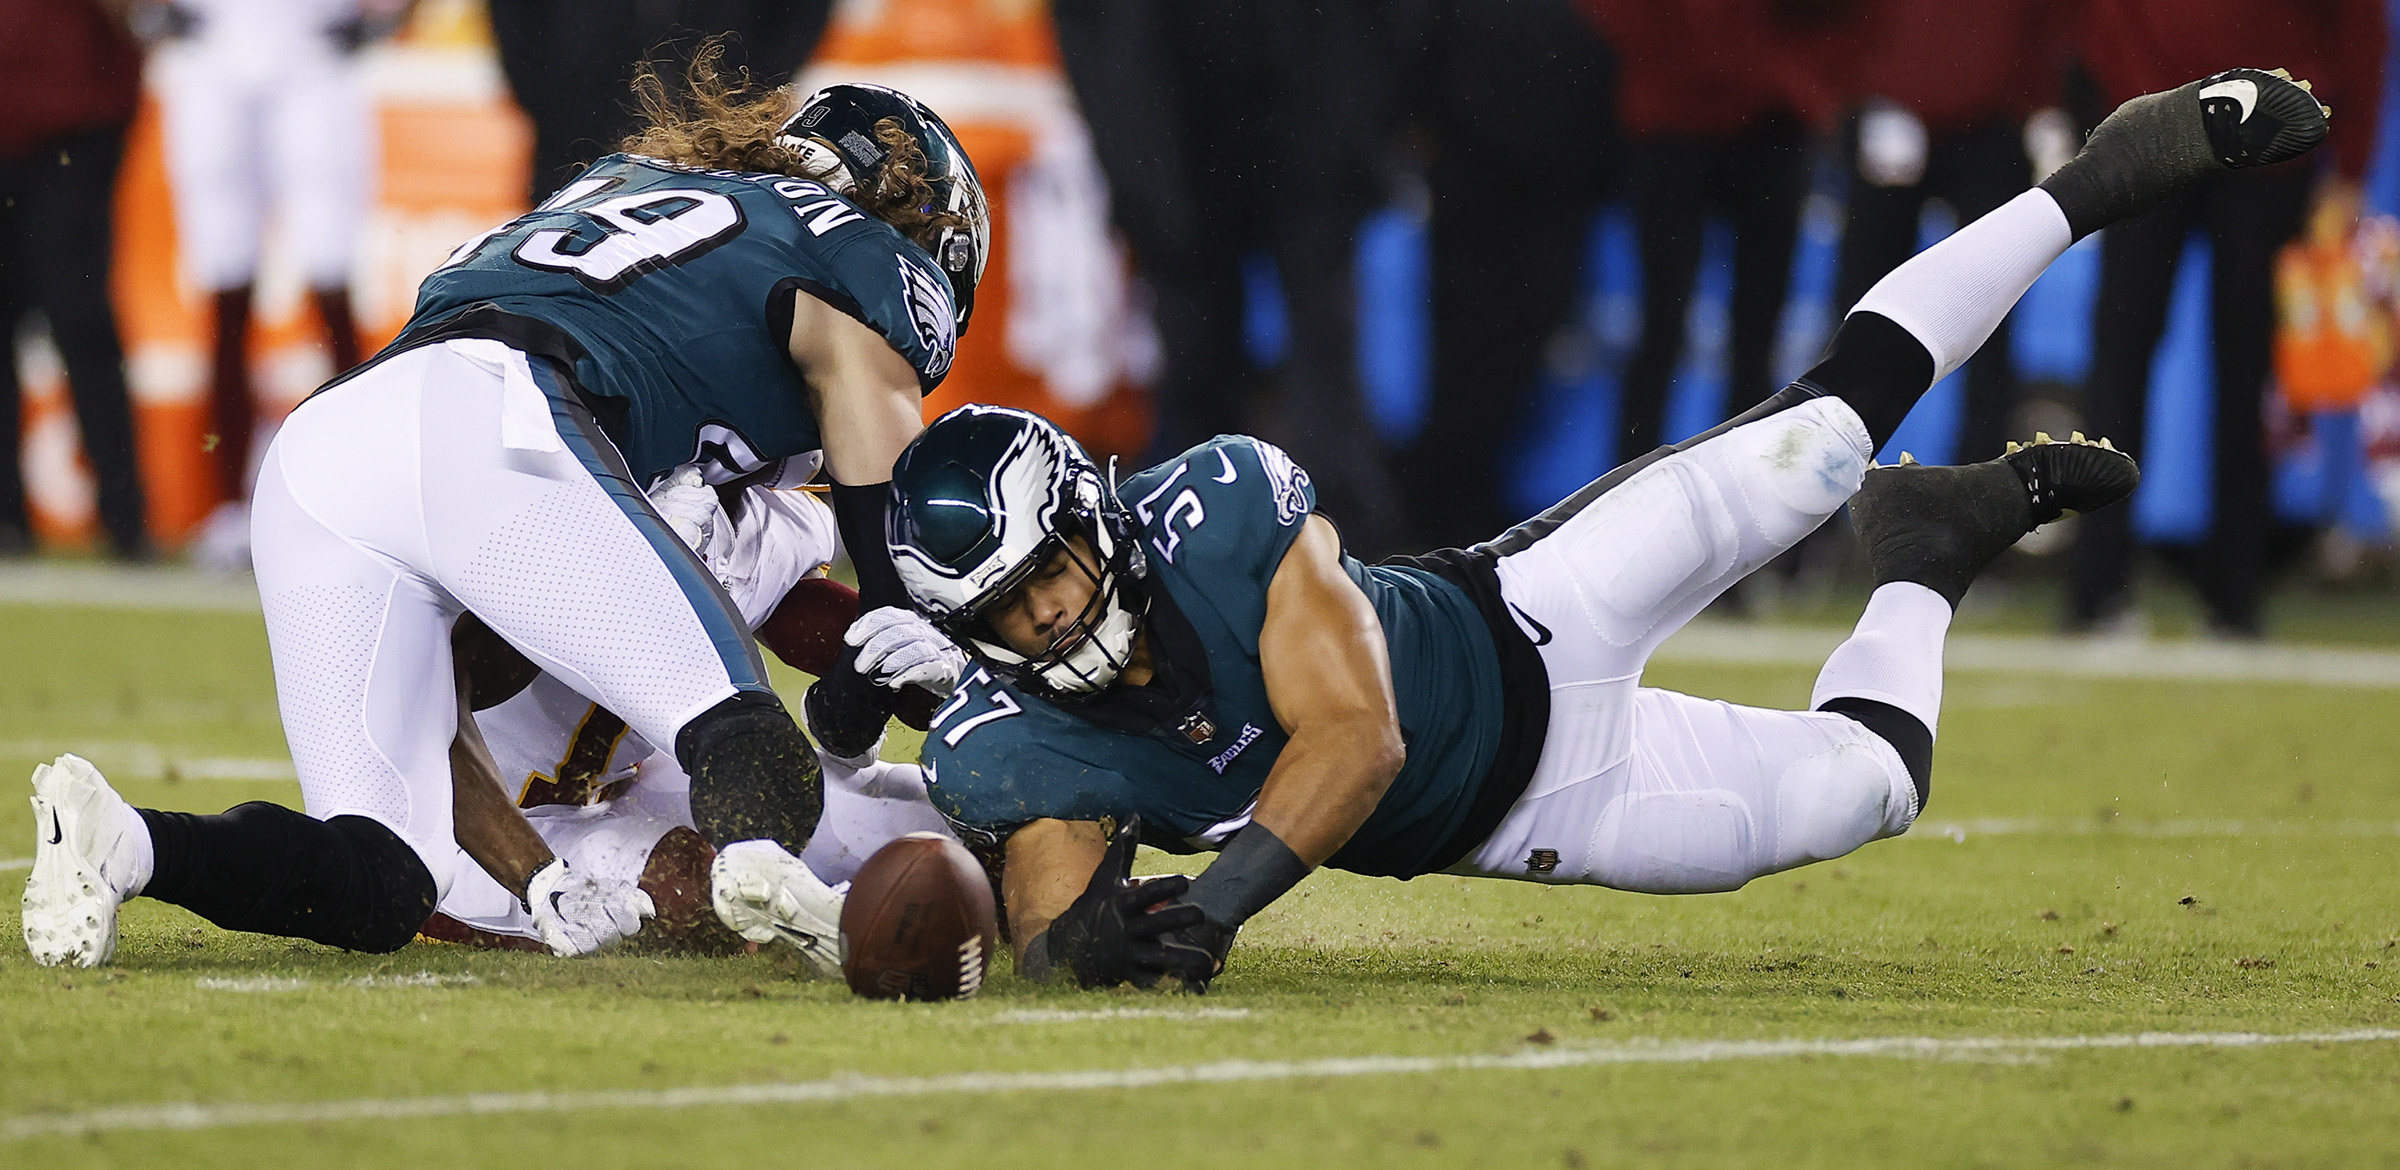 Eagles All-22 Film Review: Evaluating T.J. Edwards and Davion